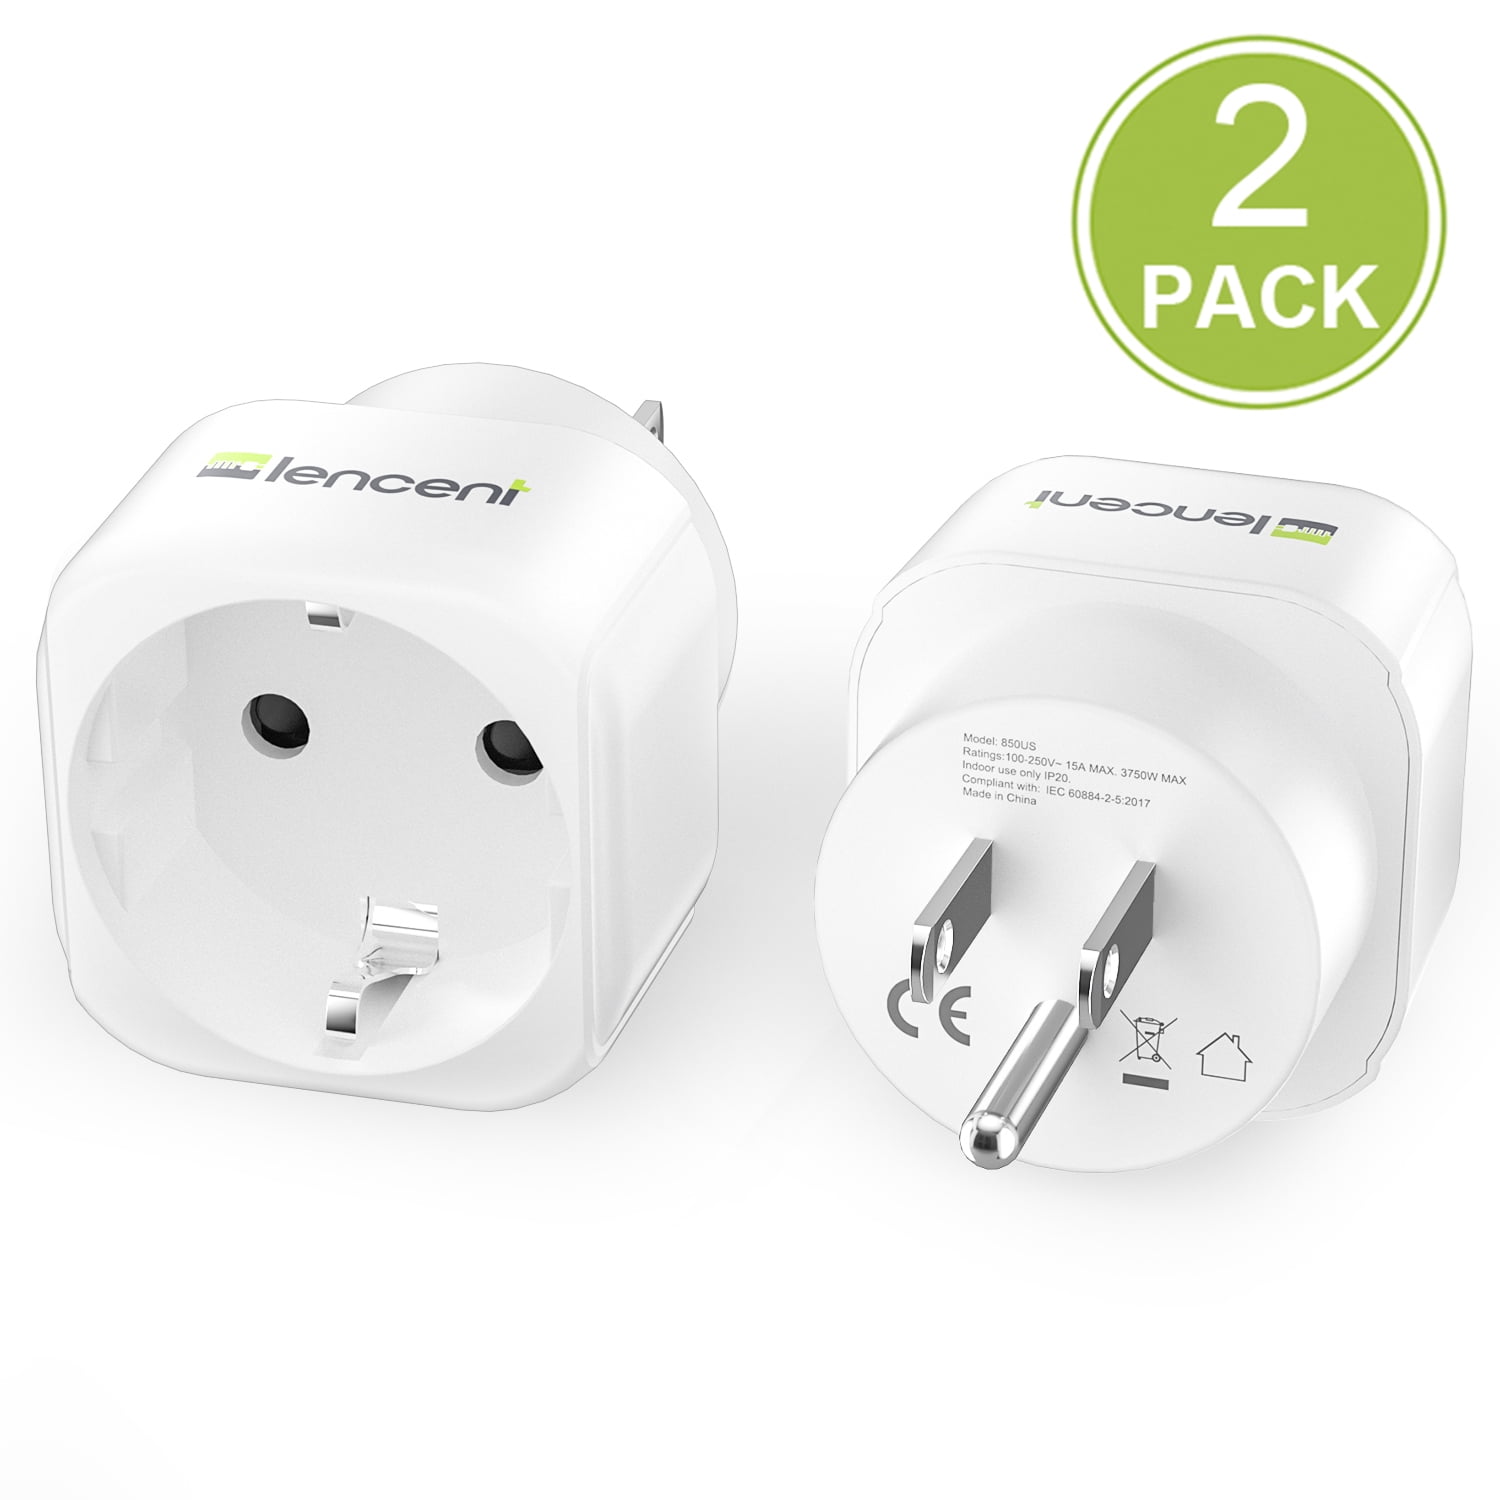 White Travel from USA Us to EU Europe Italy Plug Adapters 6 PCS EU Plug Adapter Travel Power Converter European Travel Plug Adapters from America to Europe Outlet Adaptor 